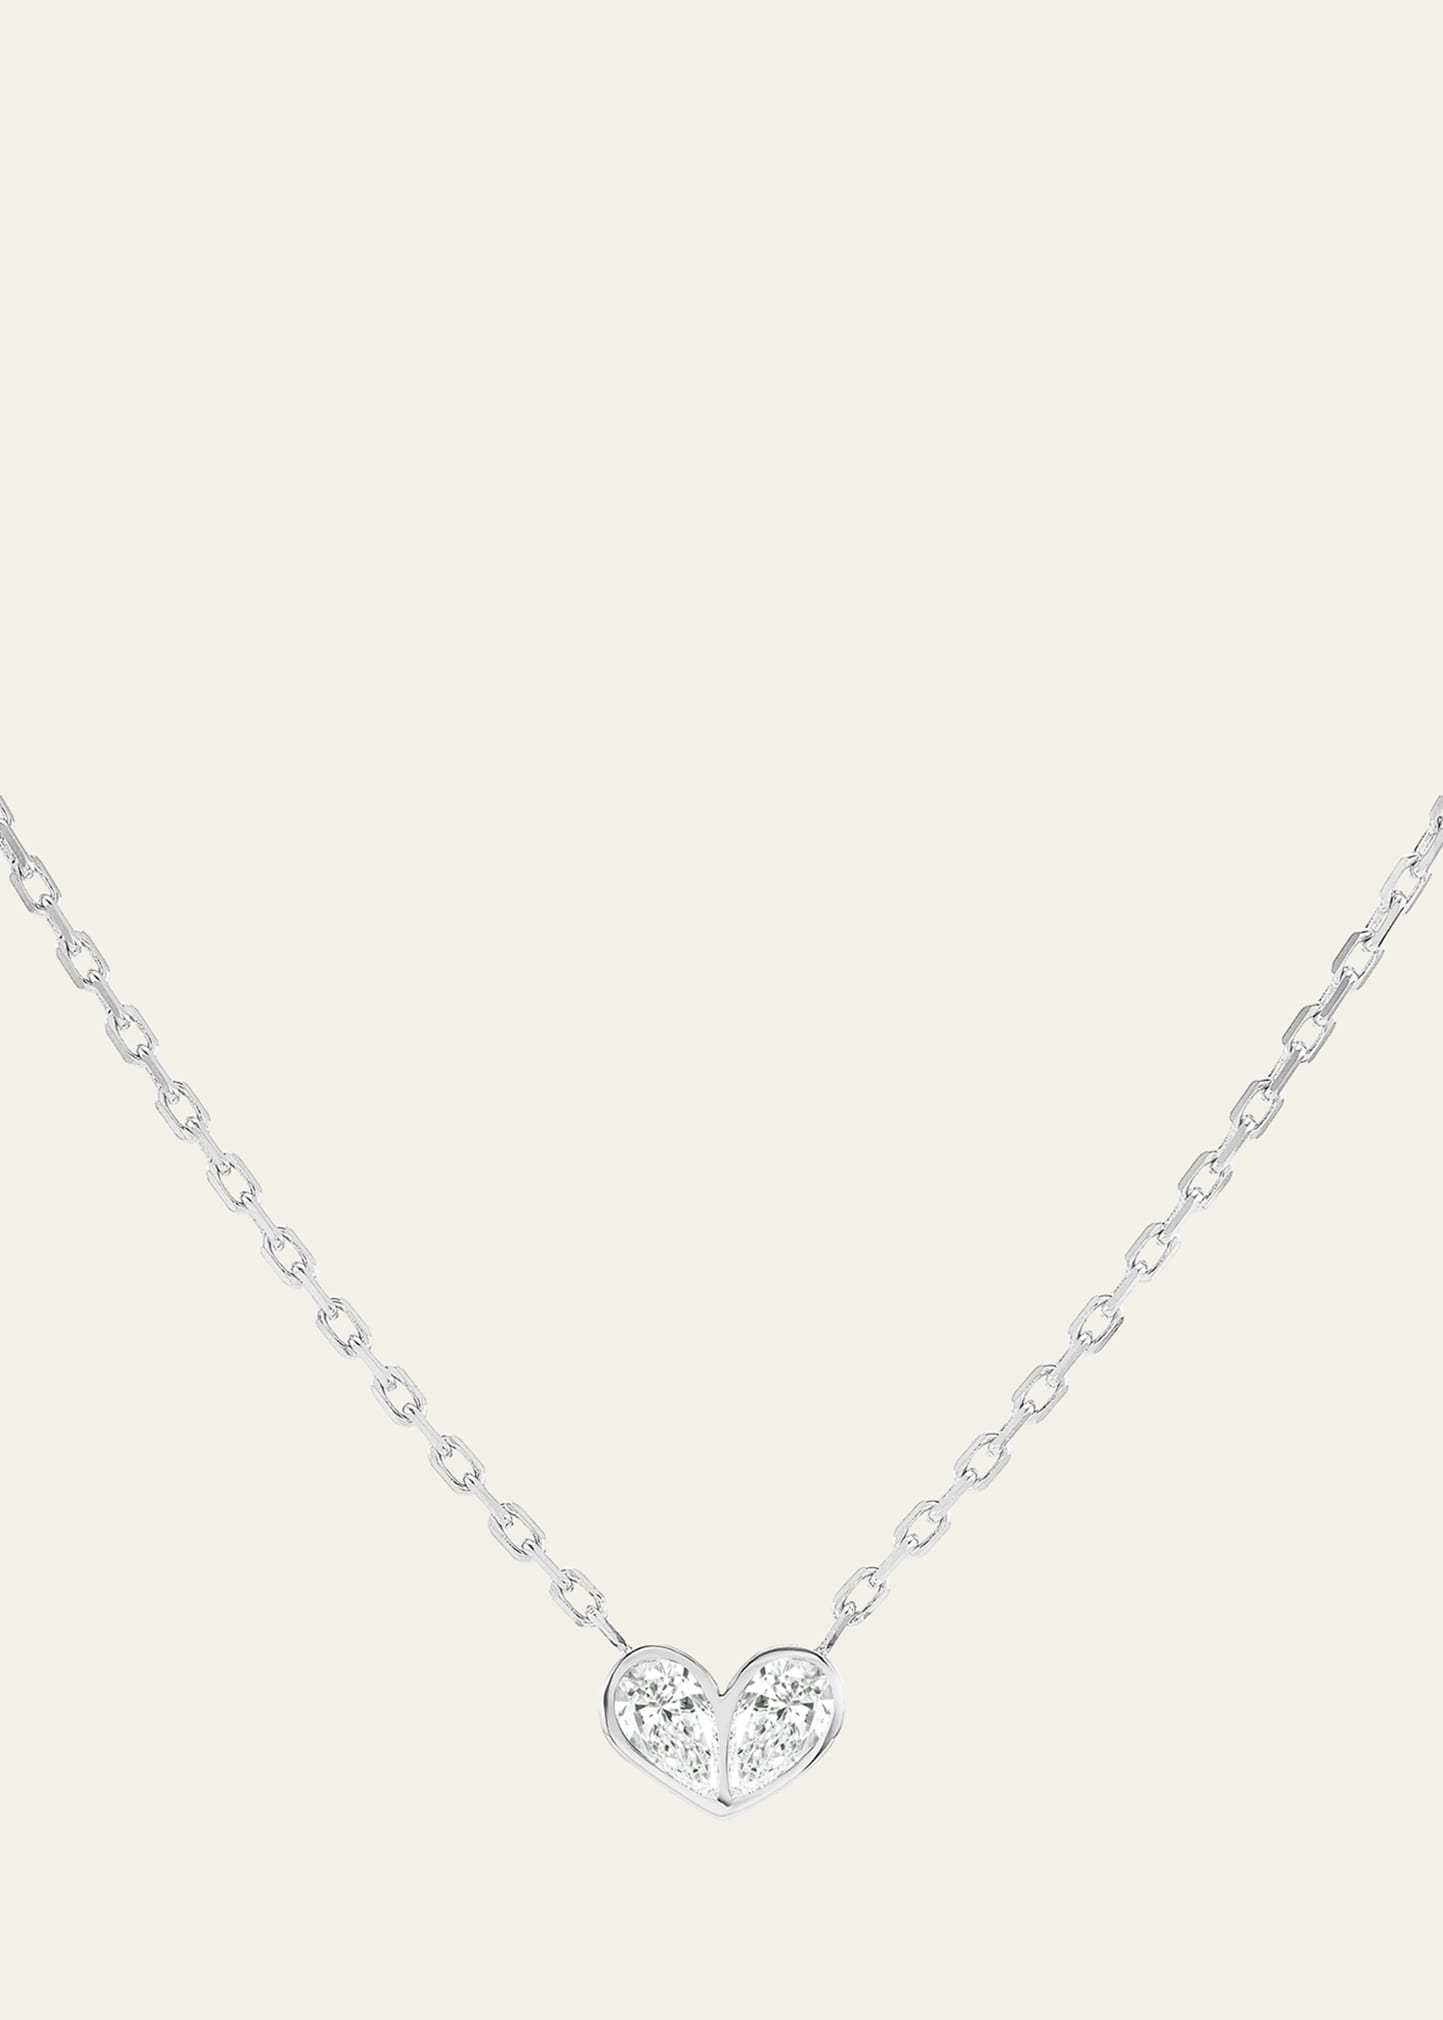 Sweetheart 18K White Gold and Diamond Necklace, 16"